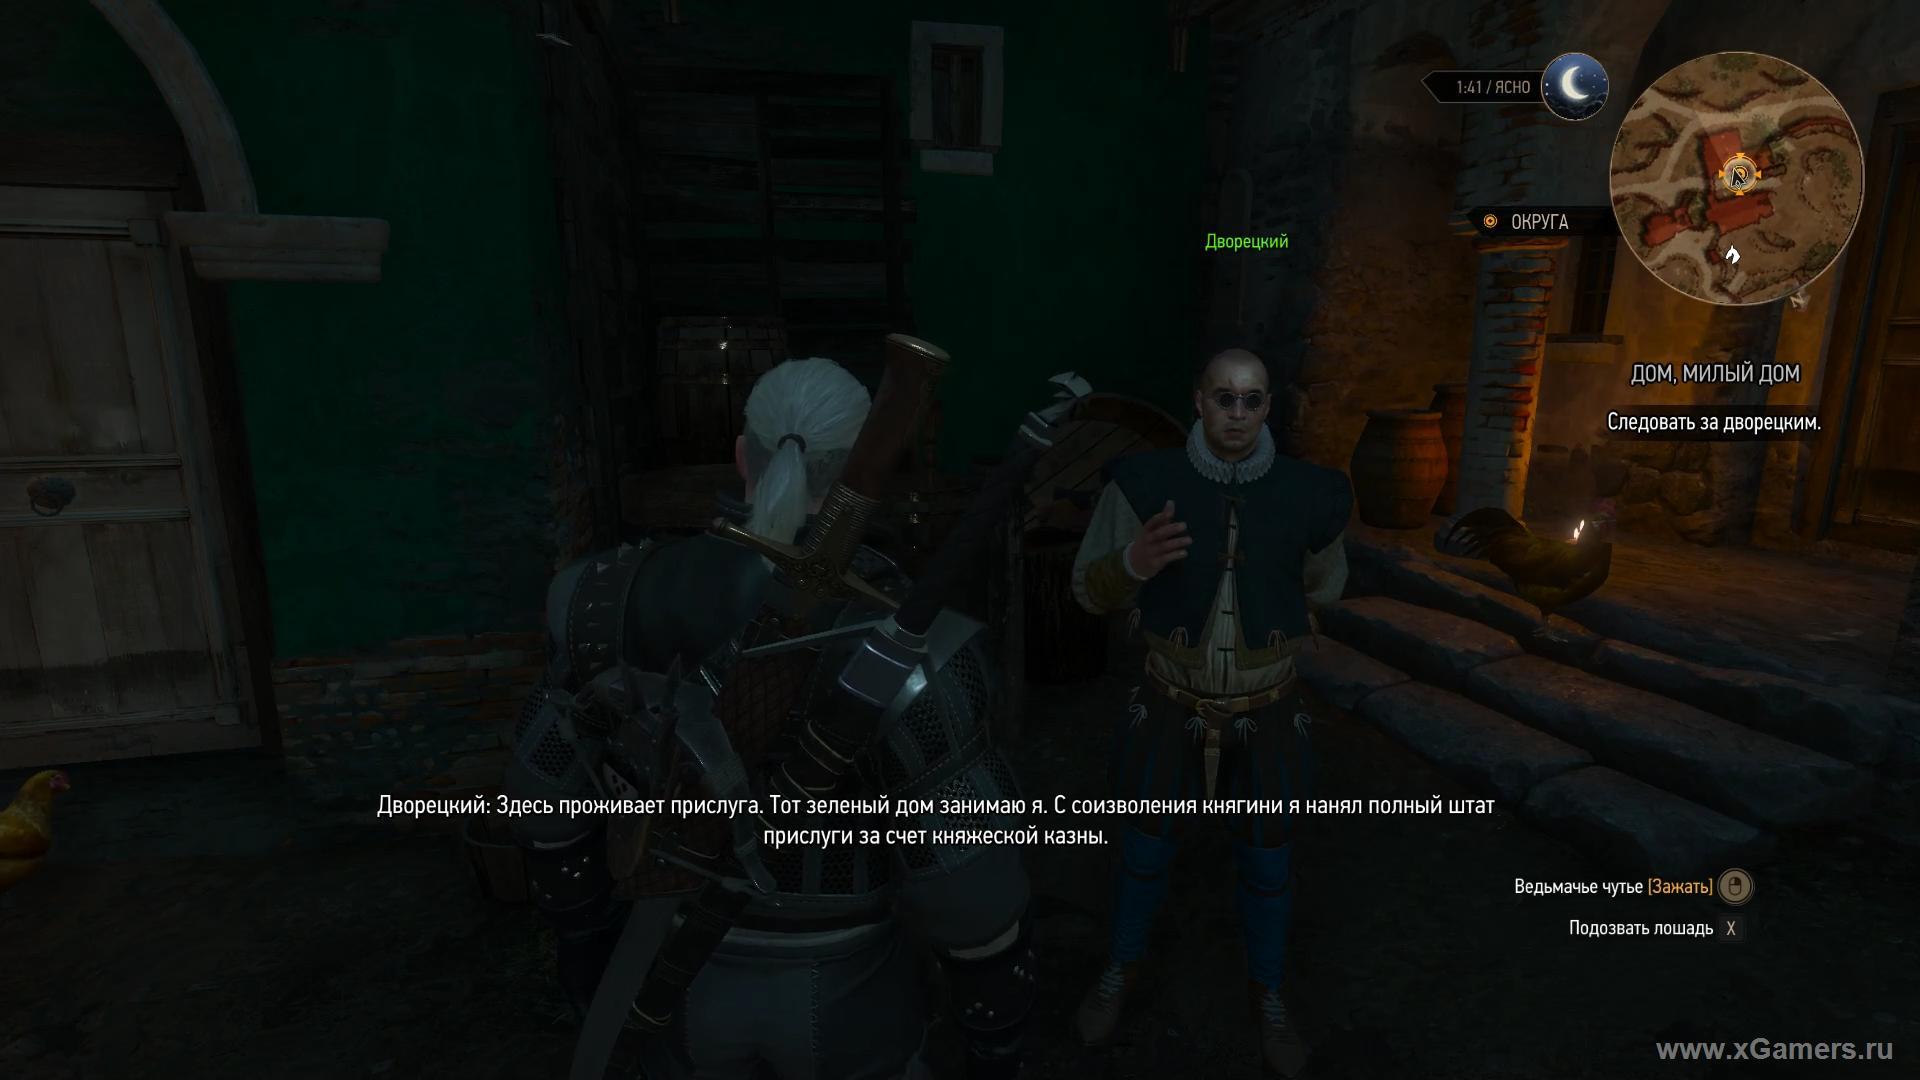 The Witcher Corvo Bianco: Review, Construction and Trophies